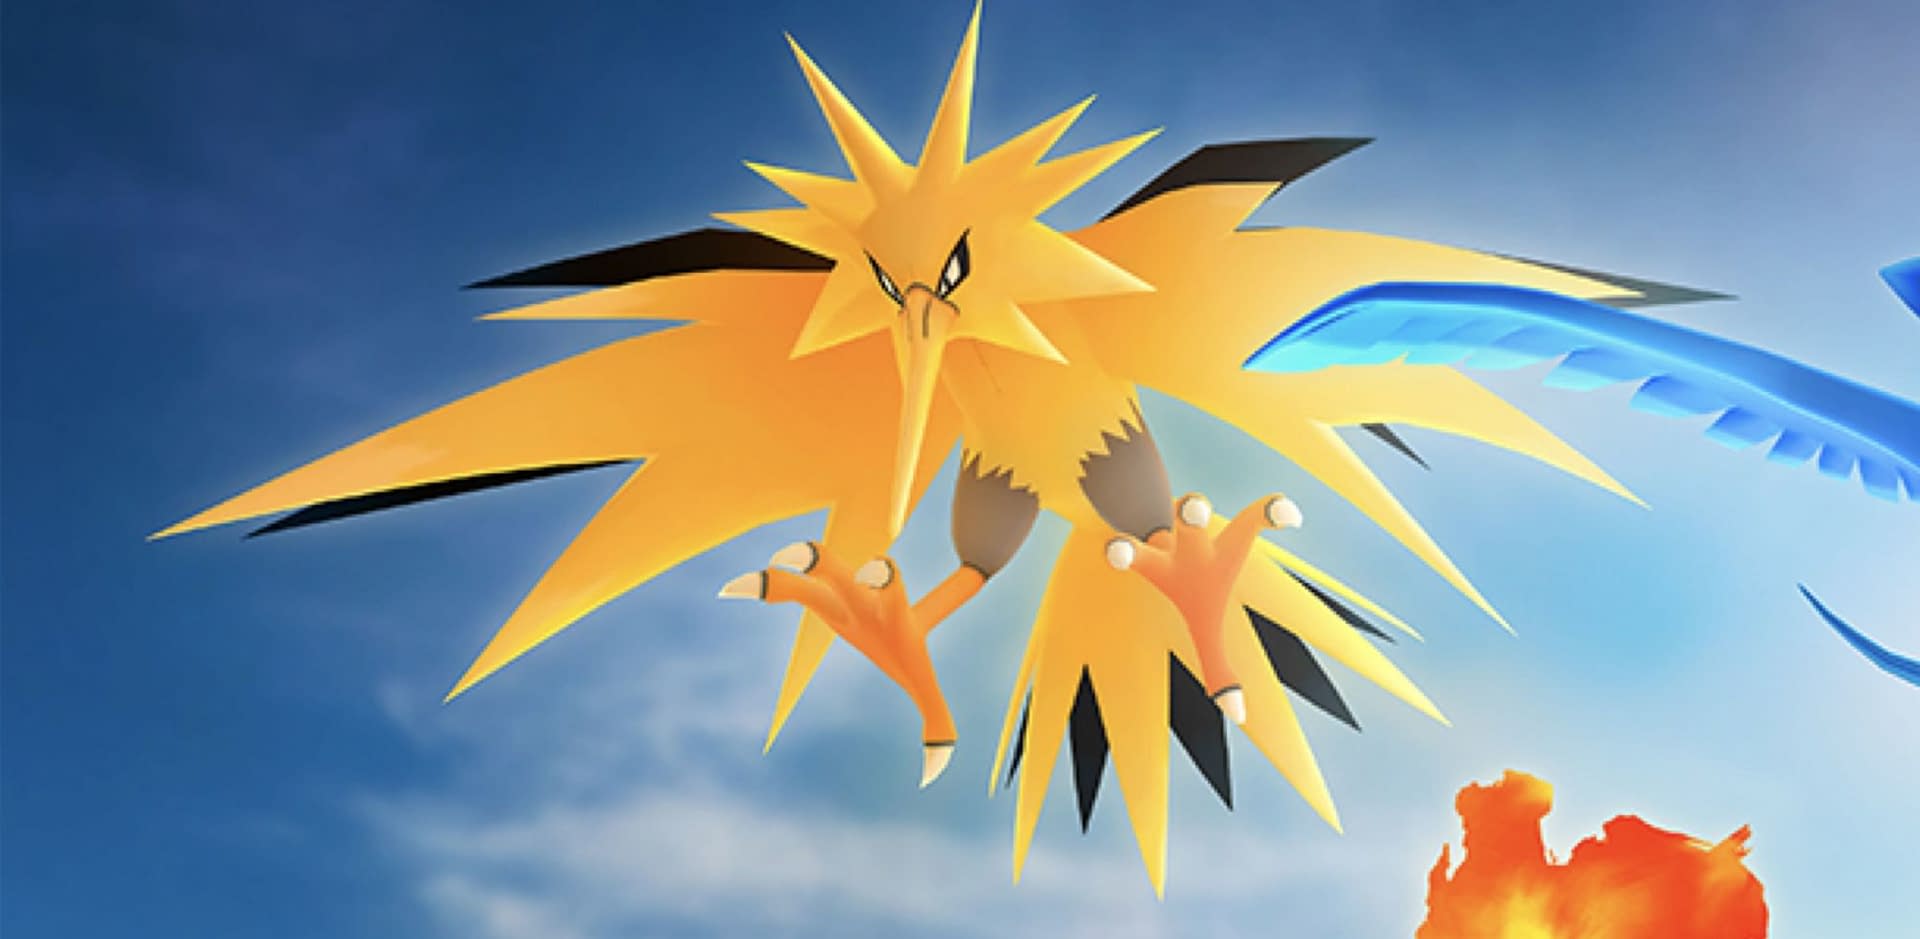 The Best Moveset for Galarian Zapdos in Pokemon GO